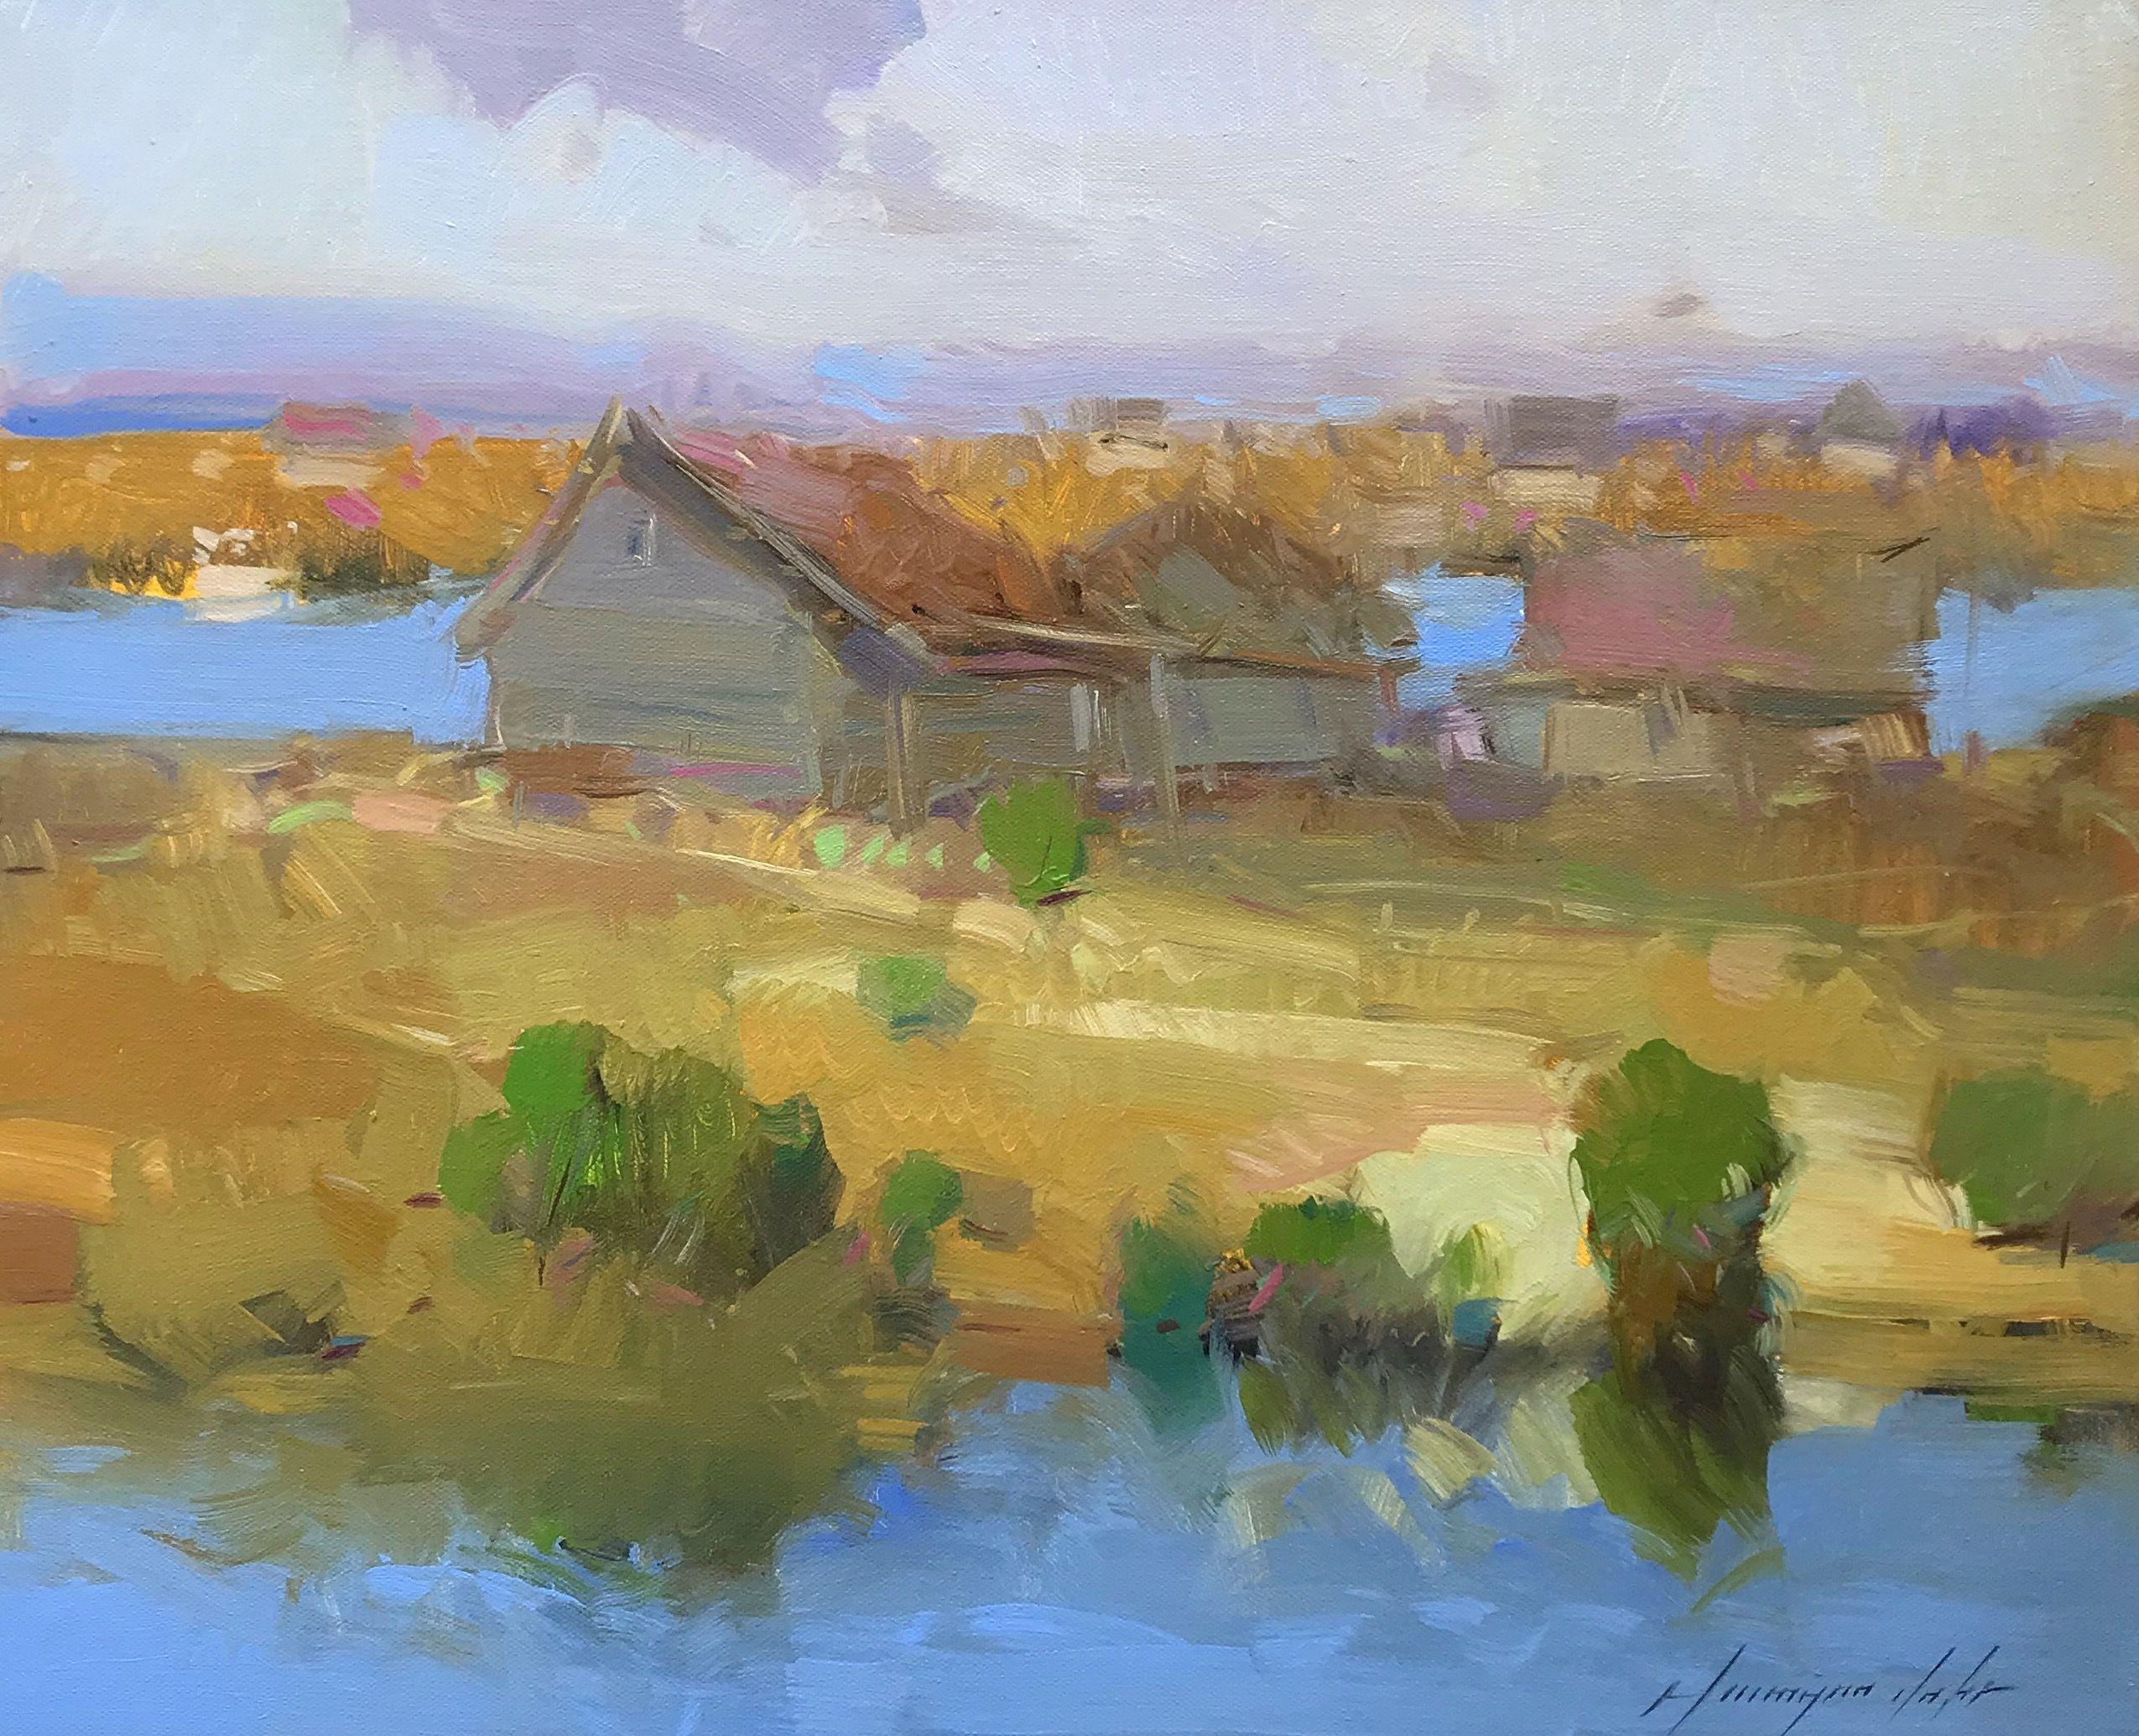 Artist: Vahe Yeremyan  Work: Original Oil Painting, Handmade Artwork, One of a Kind  Medium: Oil on Canvas  Year: 2020  Style: Impressionism,  Subject: Village Side,  Size: 16" x 20" x 0.8'' inch, 41x51x2 cm,  Unframed, Stretched on Wooden Bar,